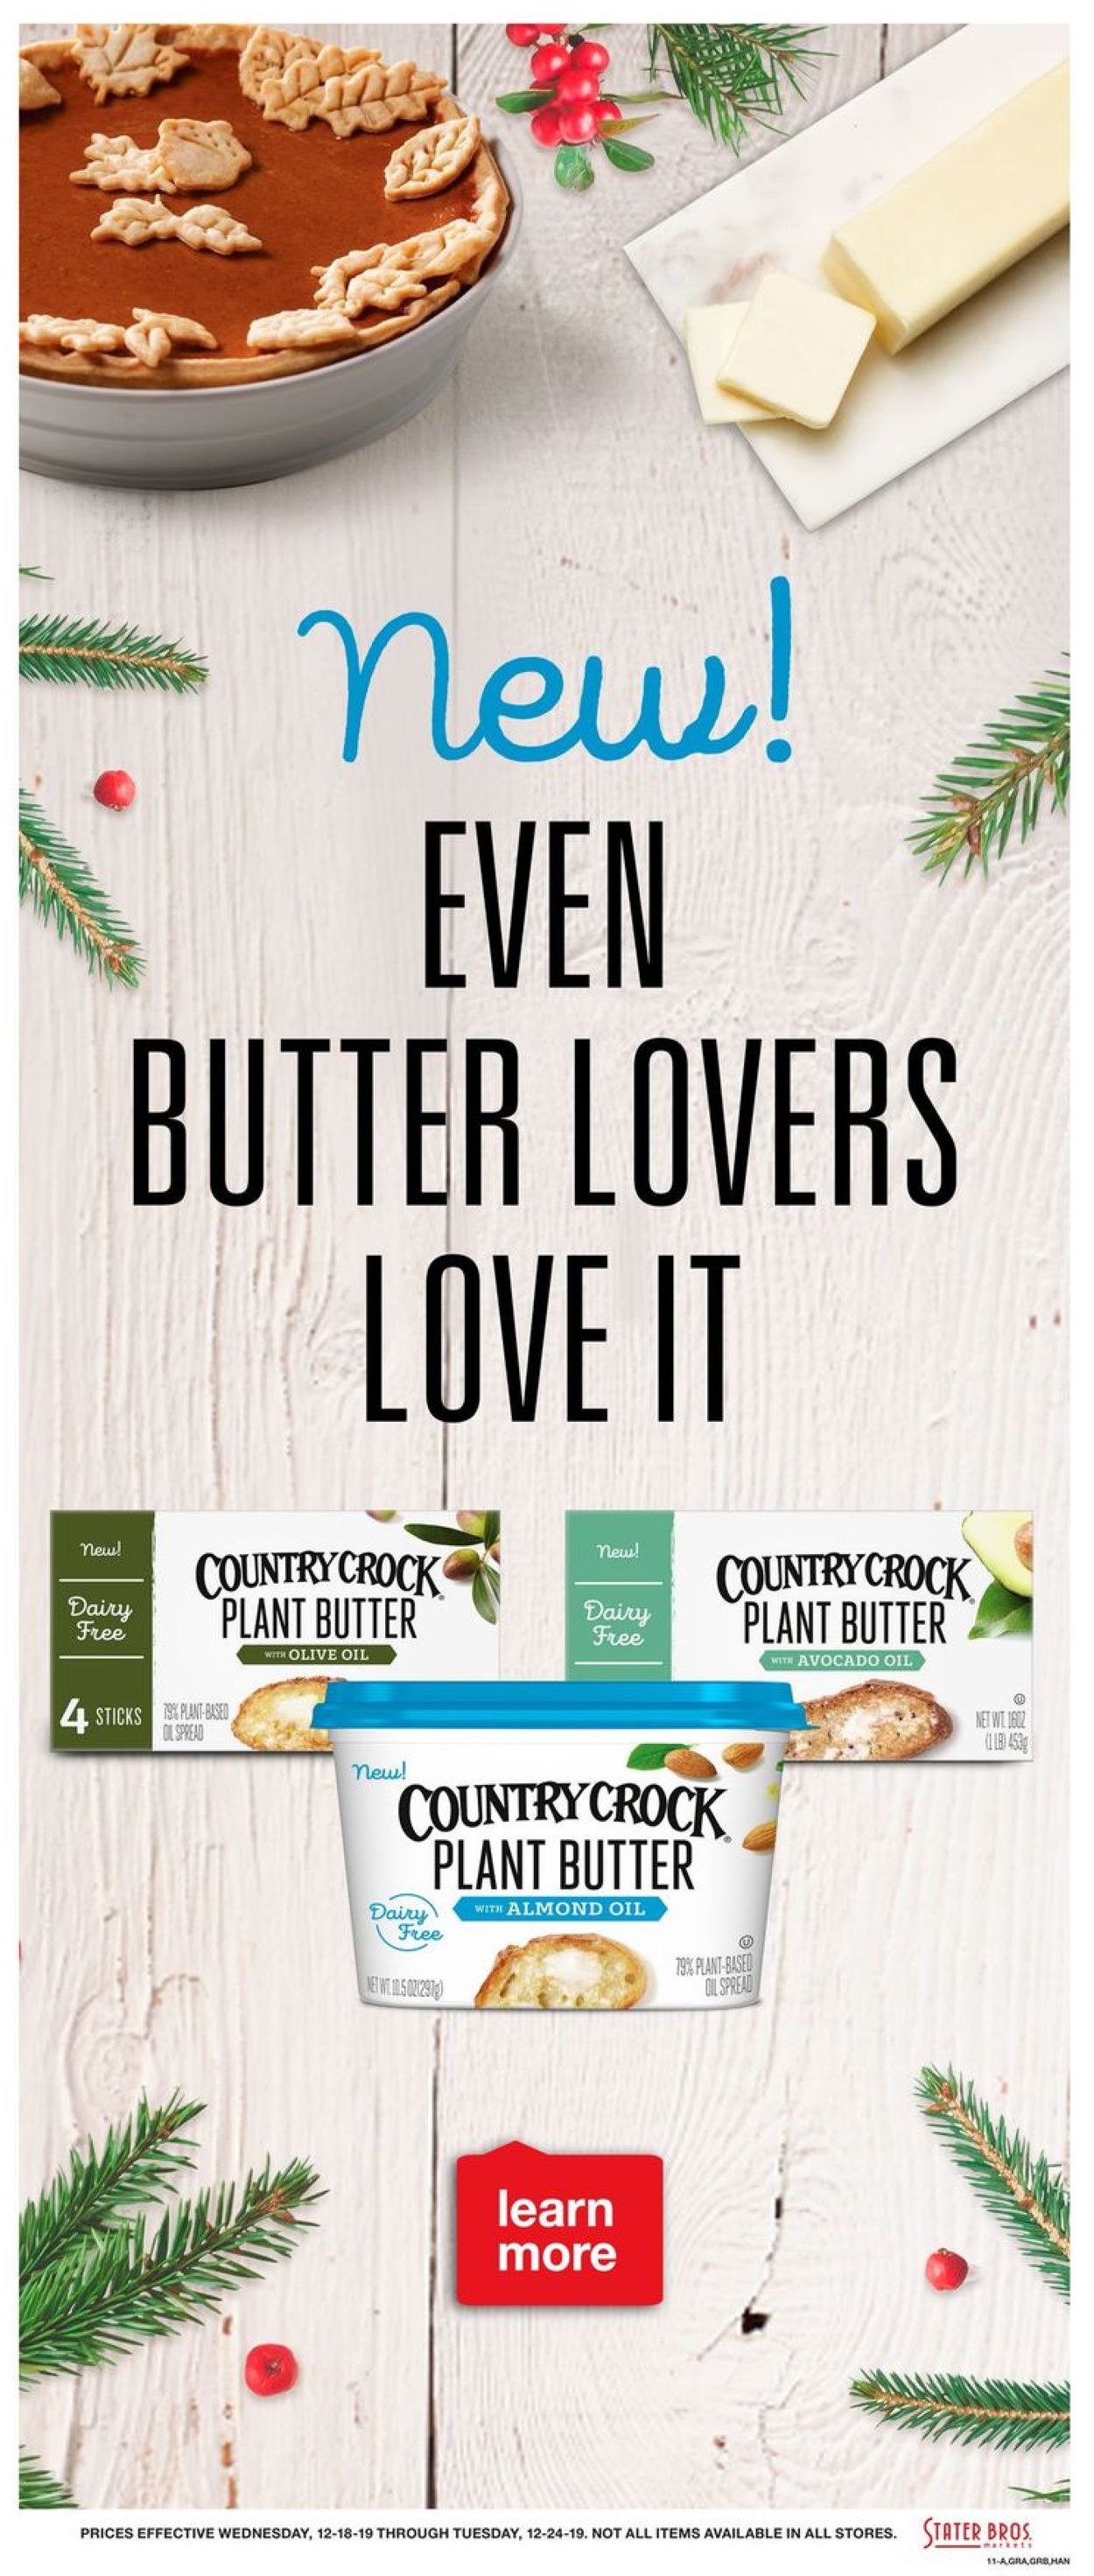 Catalogue Stater Bros. - Christmas Ad 2019 from 12/18/2019